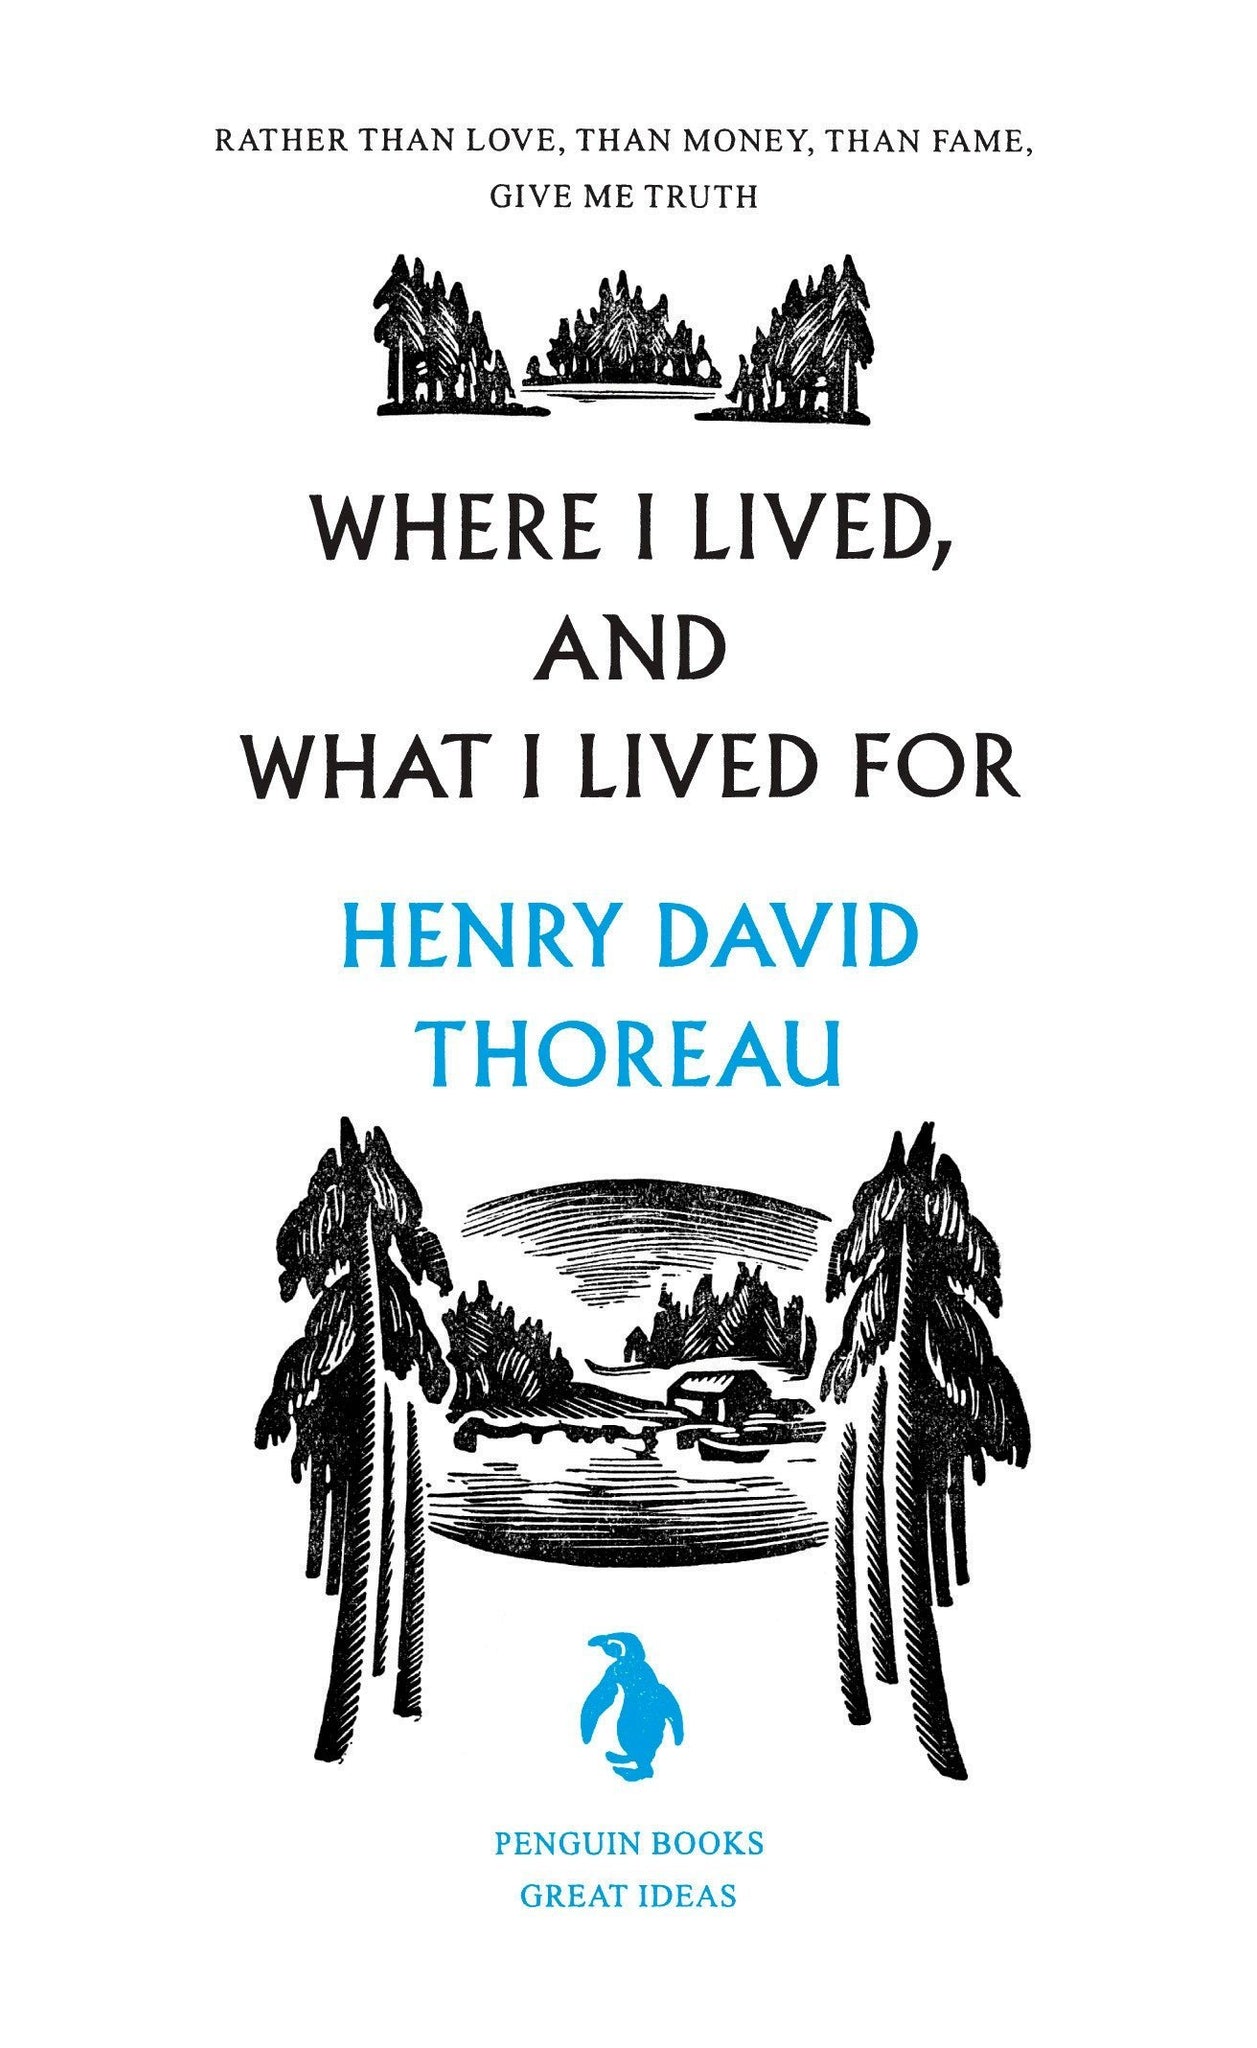 Where I Lived, and What I Lived For by Henry David Thoreau